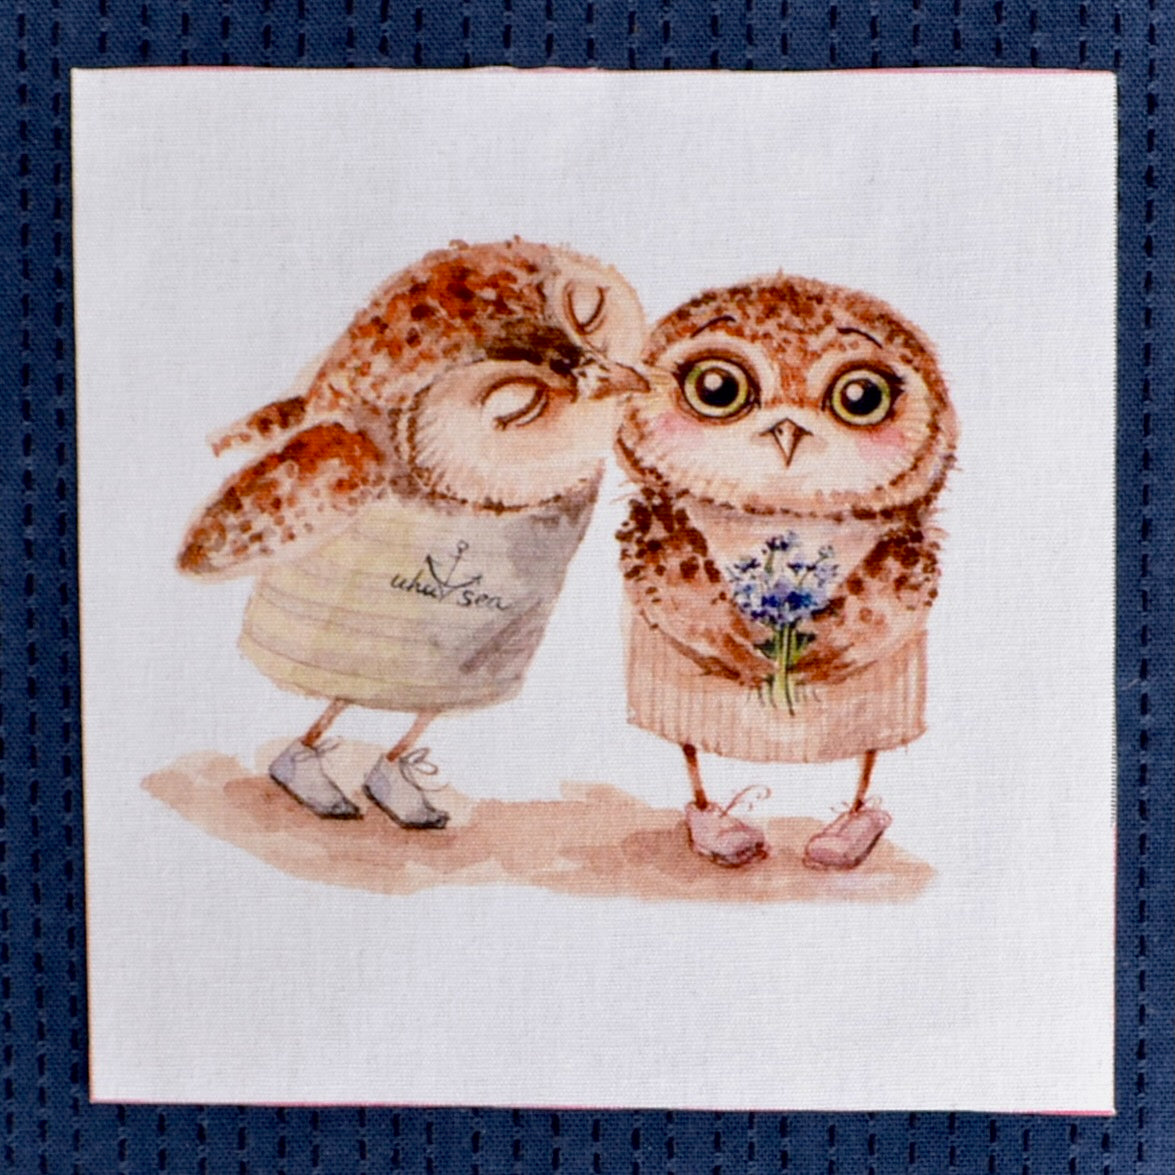 Fabric owls patch for quilt label, mending, embellishing